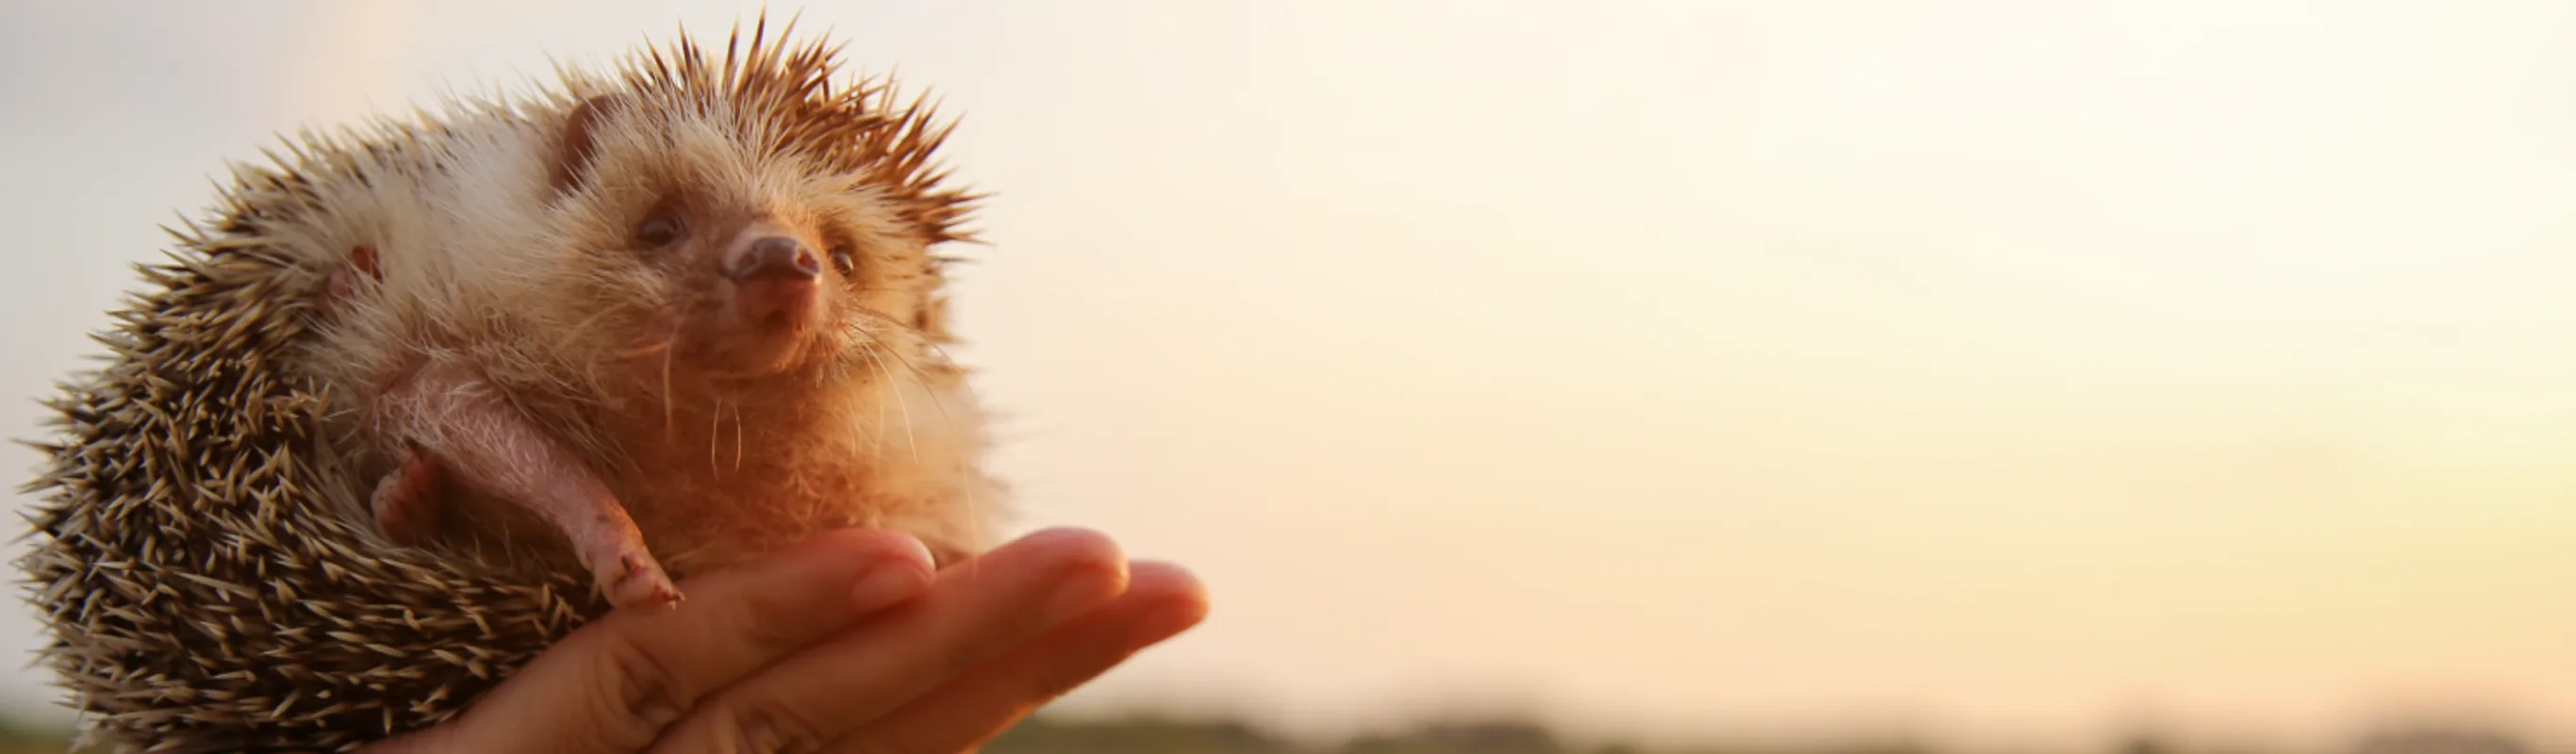 Hedgehog being held in someone's hand outside with an orange yellow sky 